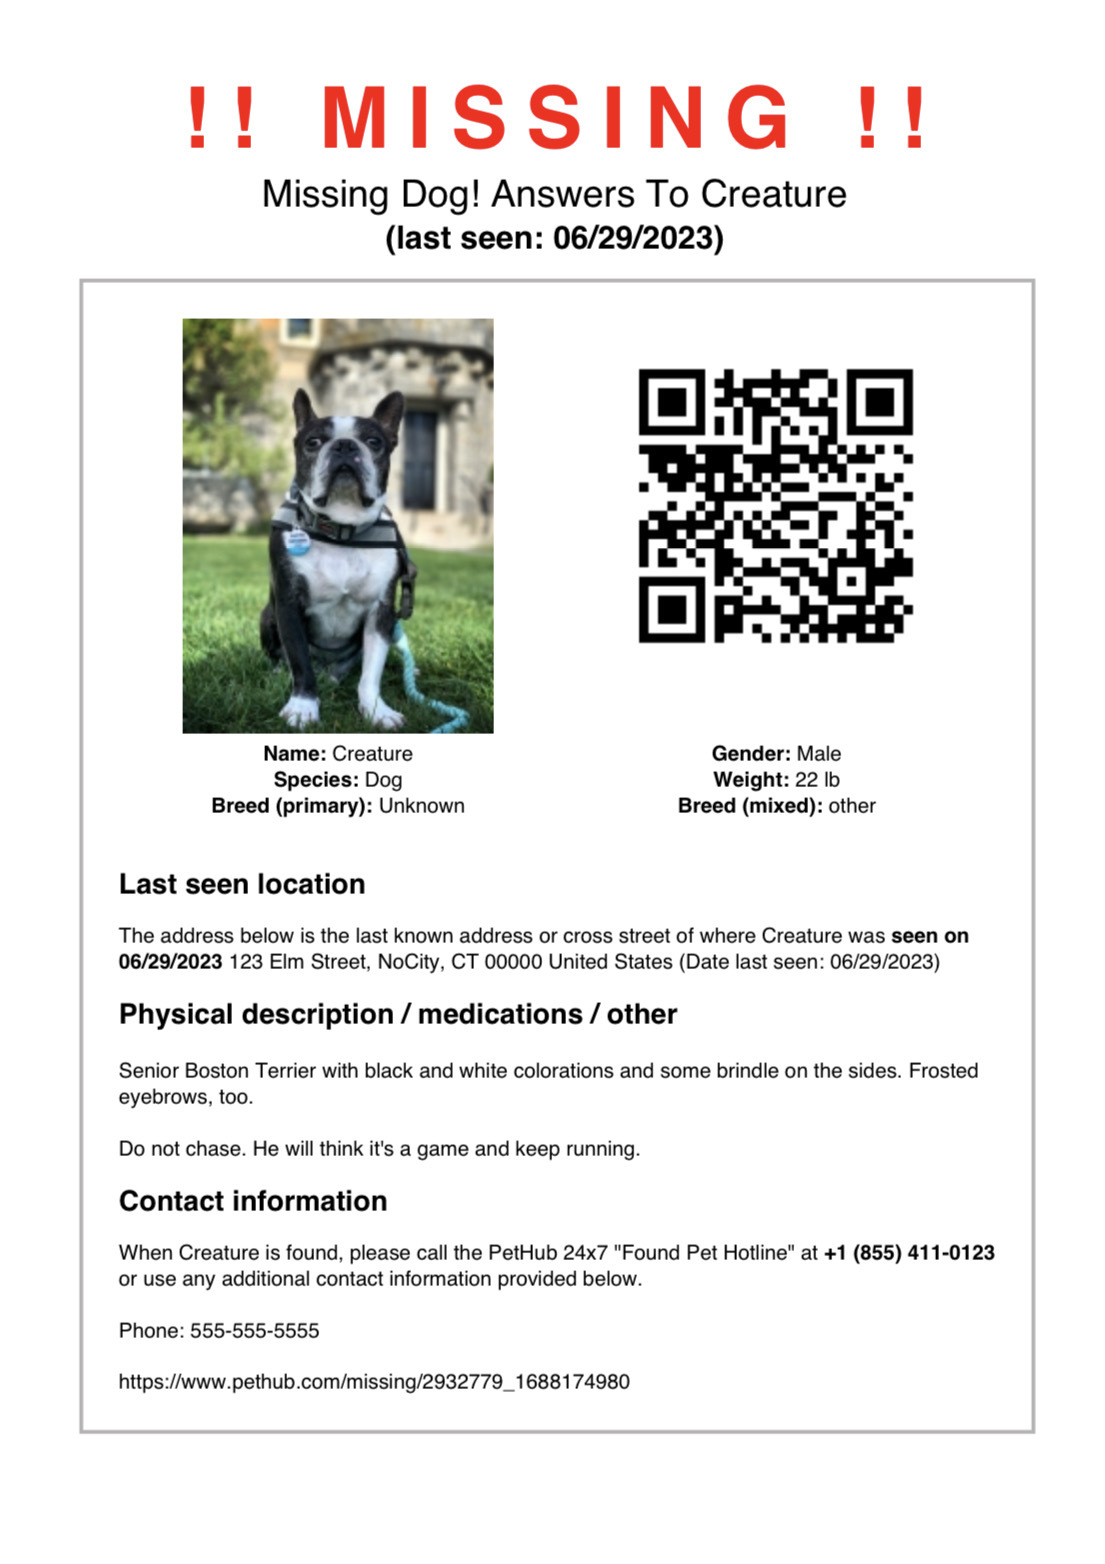 lost pet poster 